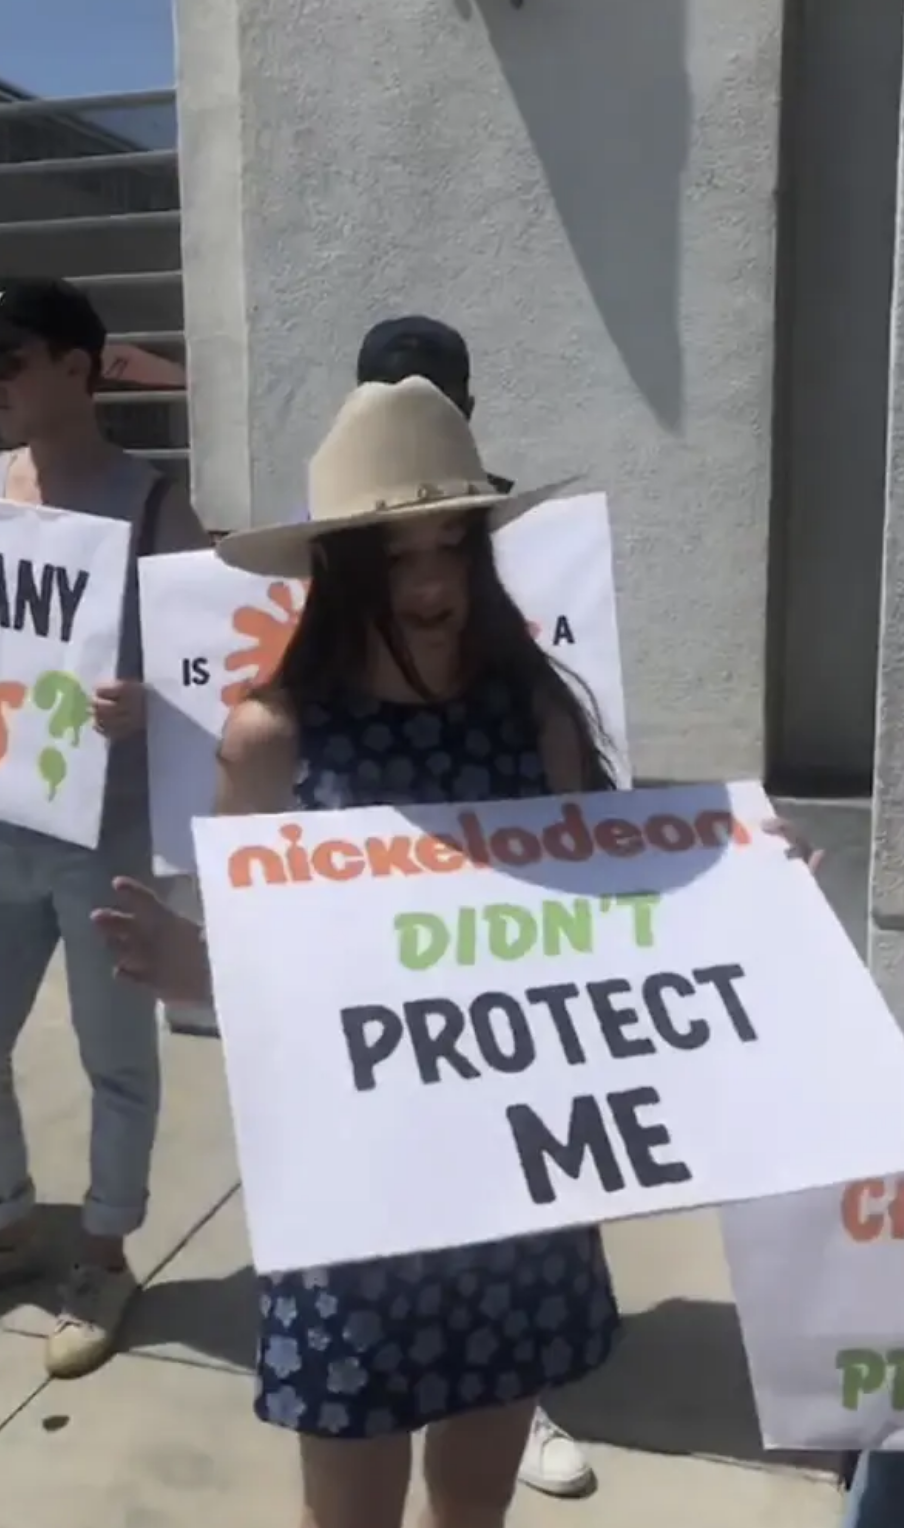 Alexa holding a sign that says "Nickelodeon didn't protect me"